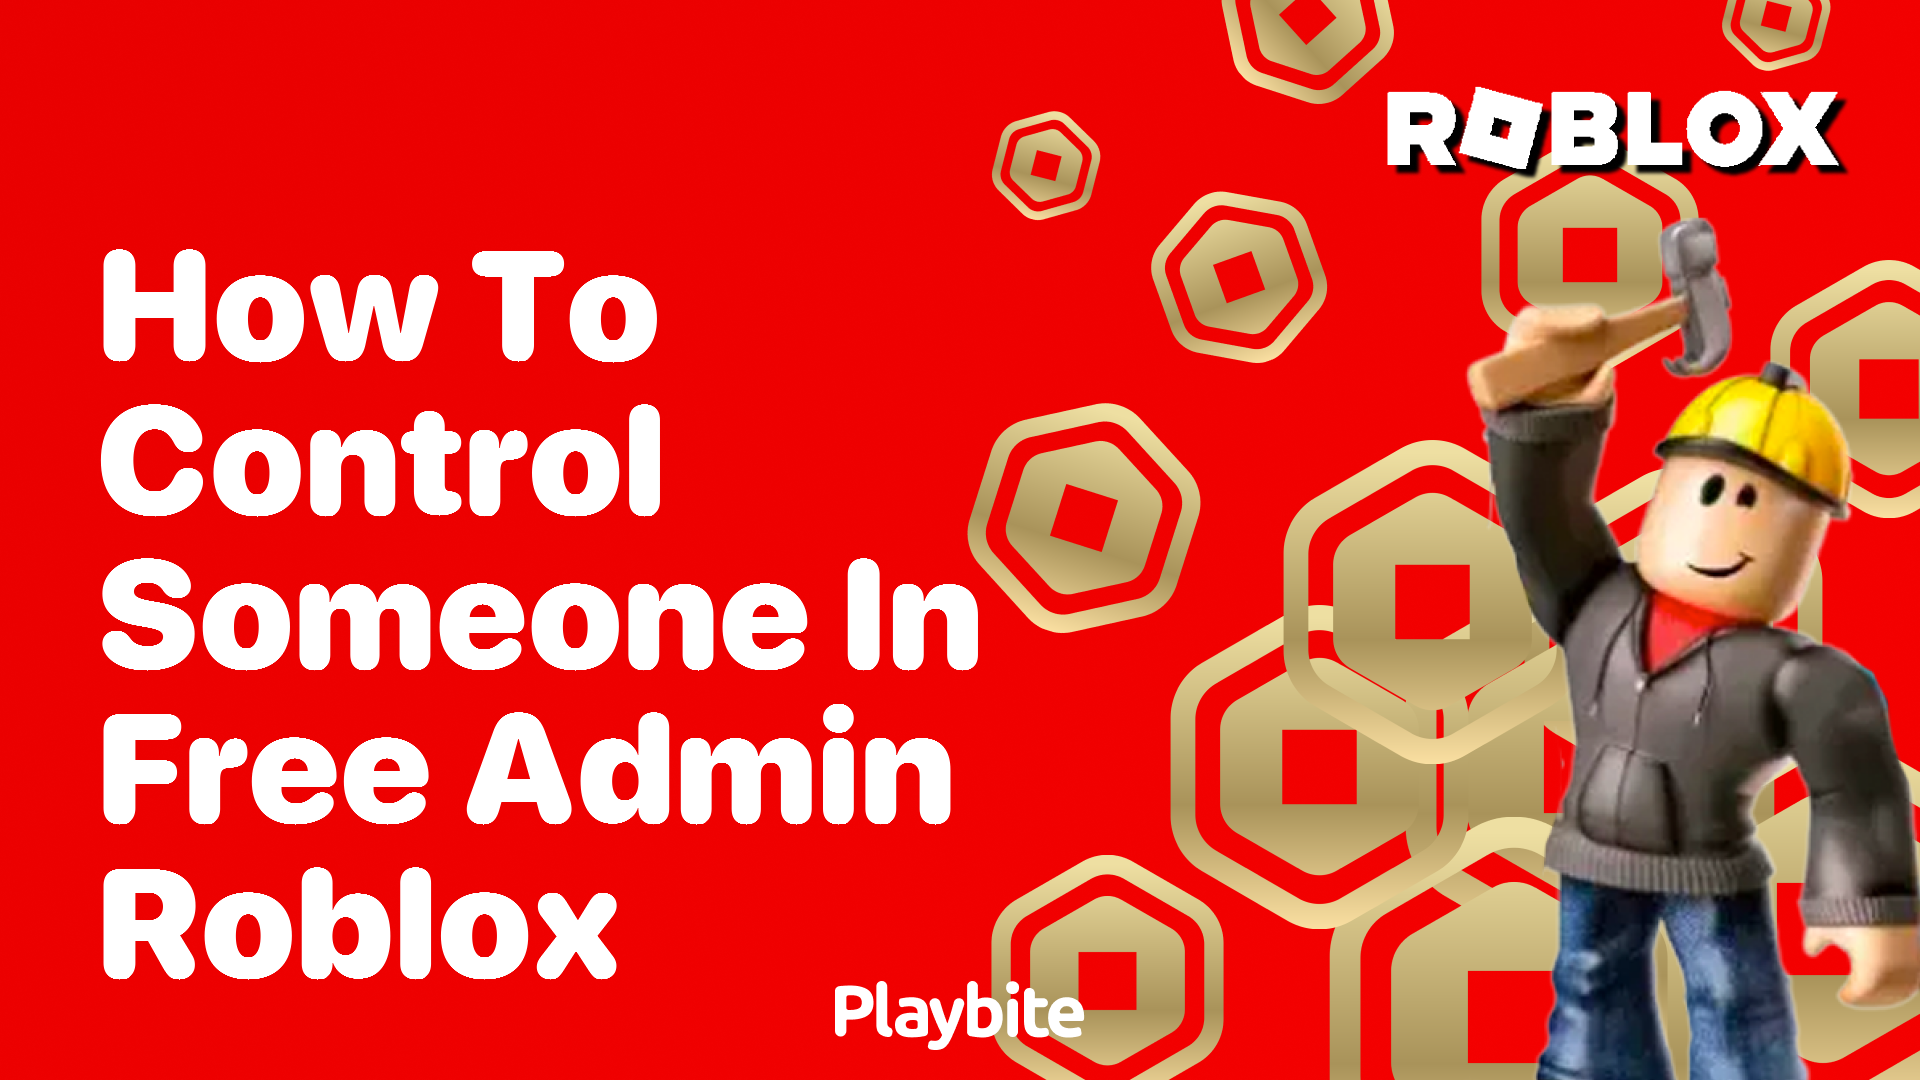 How to Control Someone in Free Admin Roblox